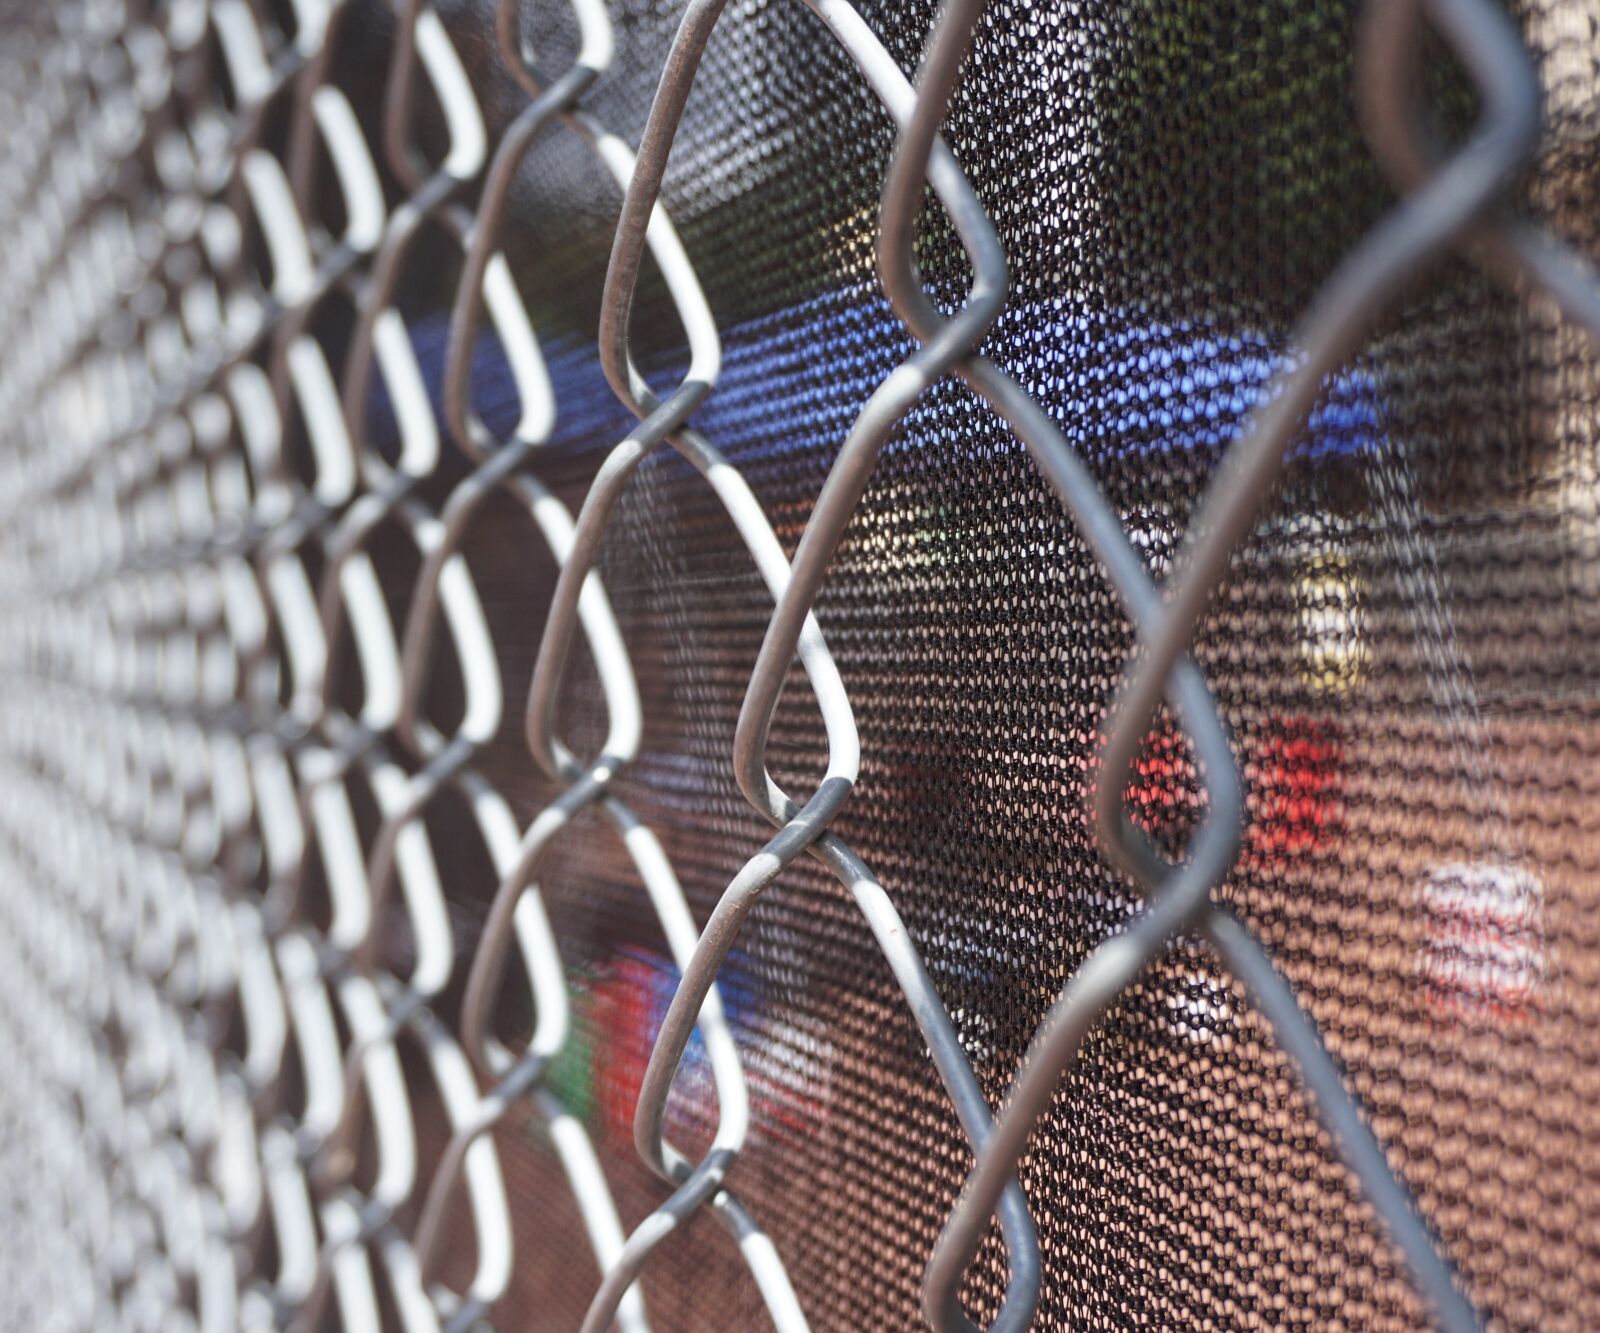 Sony a6000 sample photo. Fence, chain, under construction photography